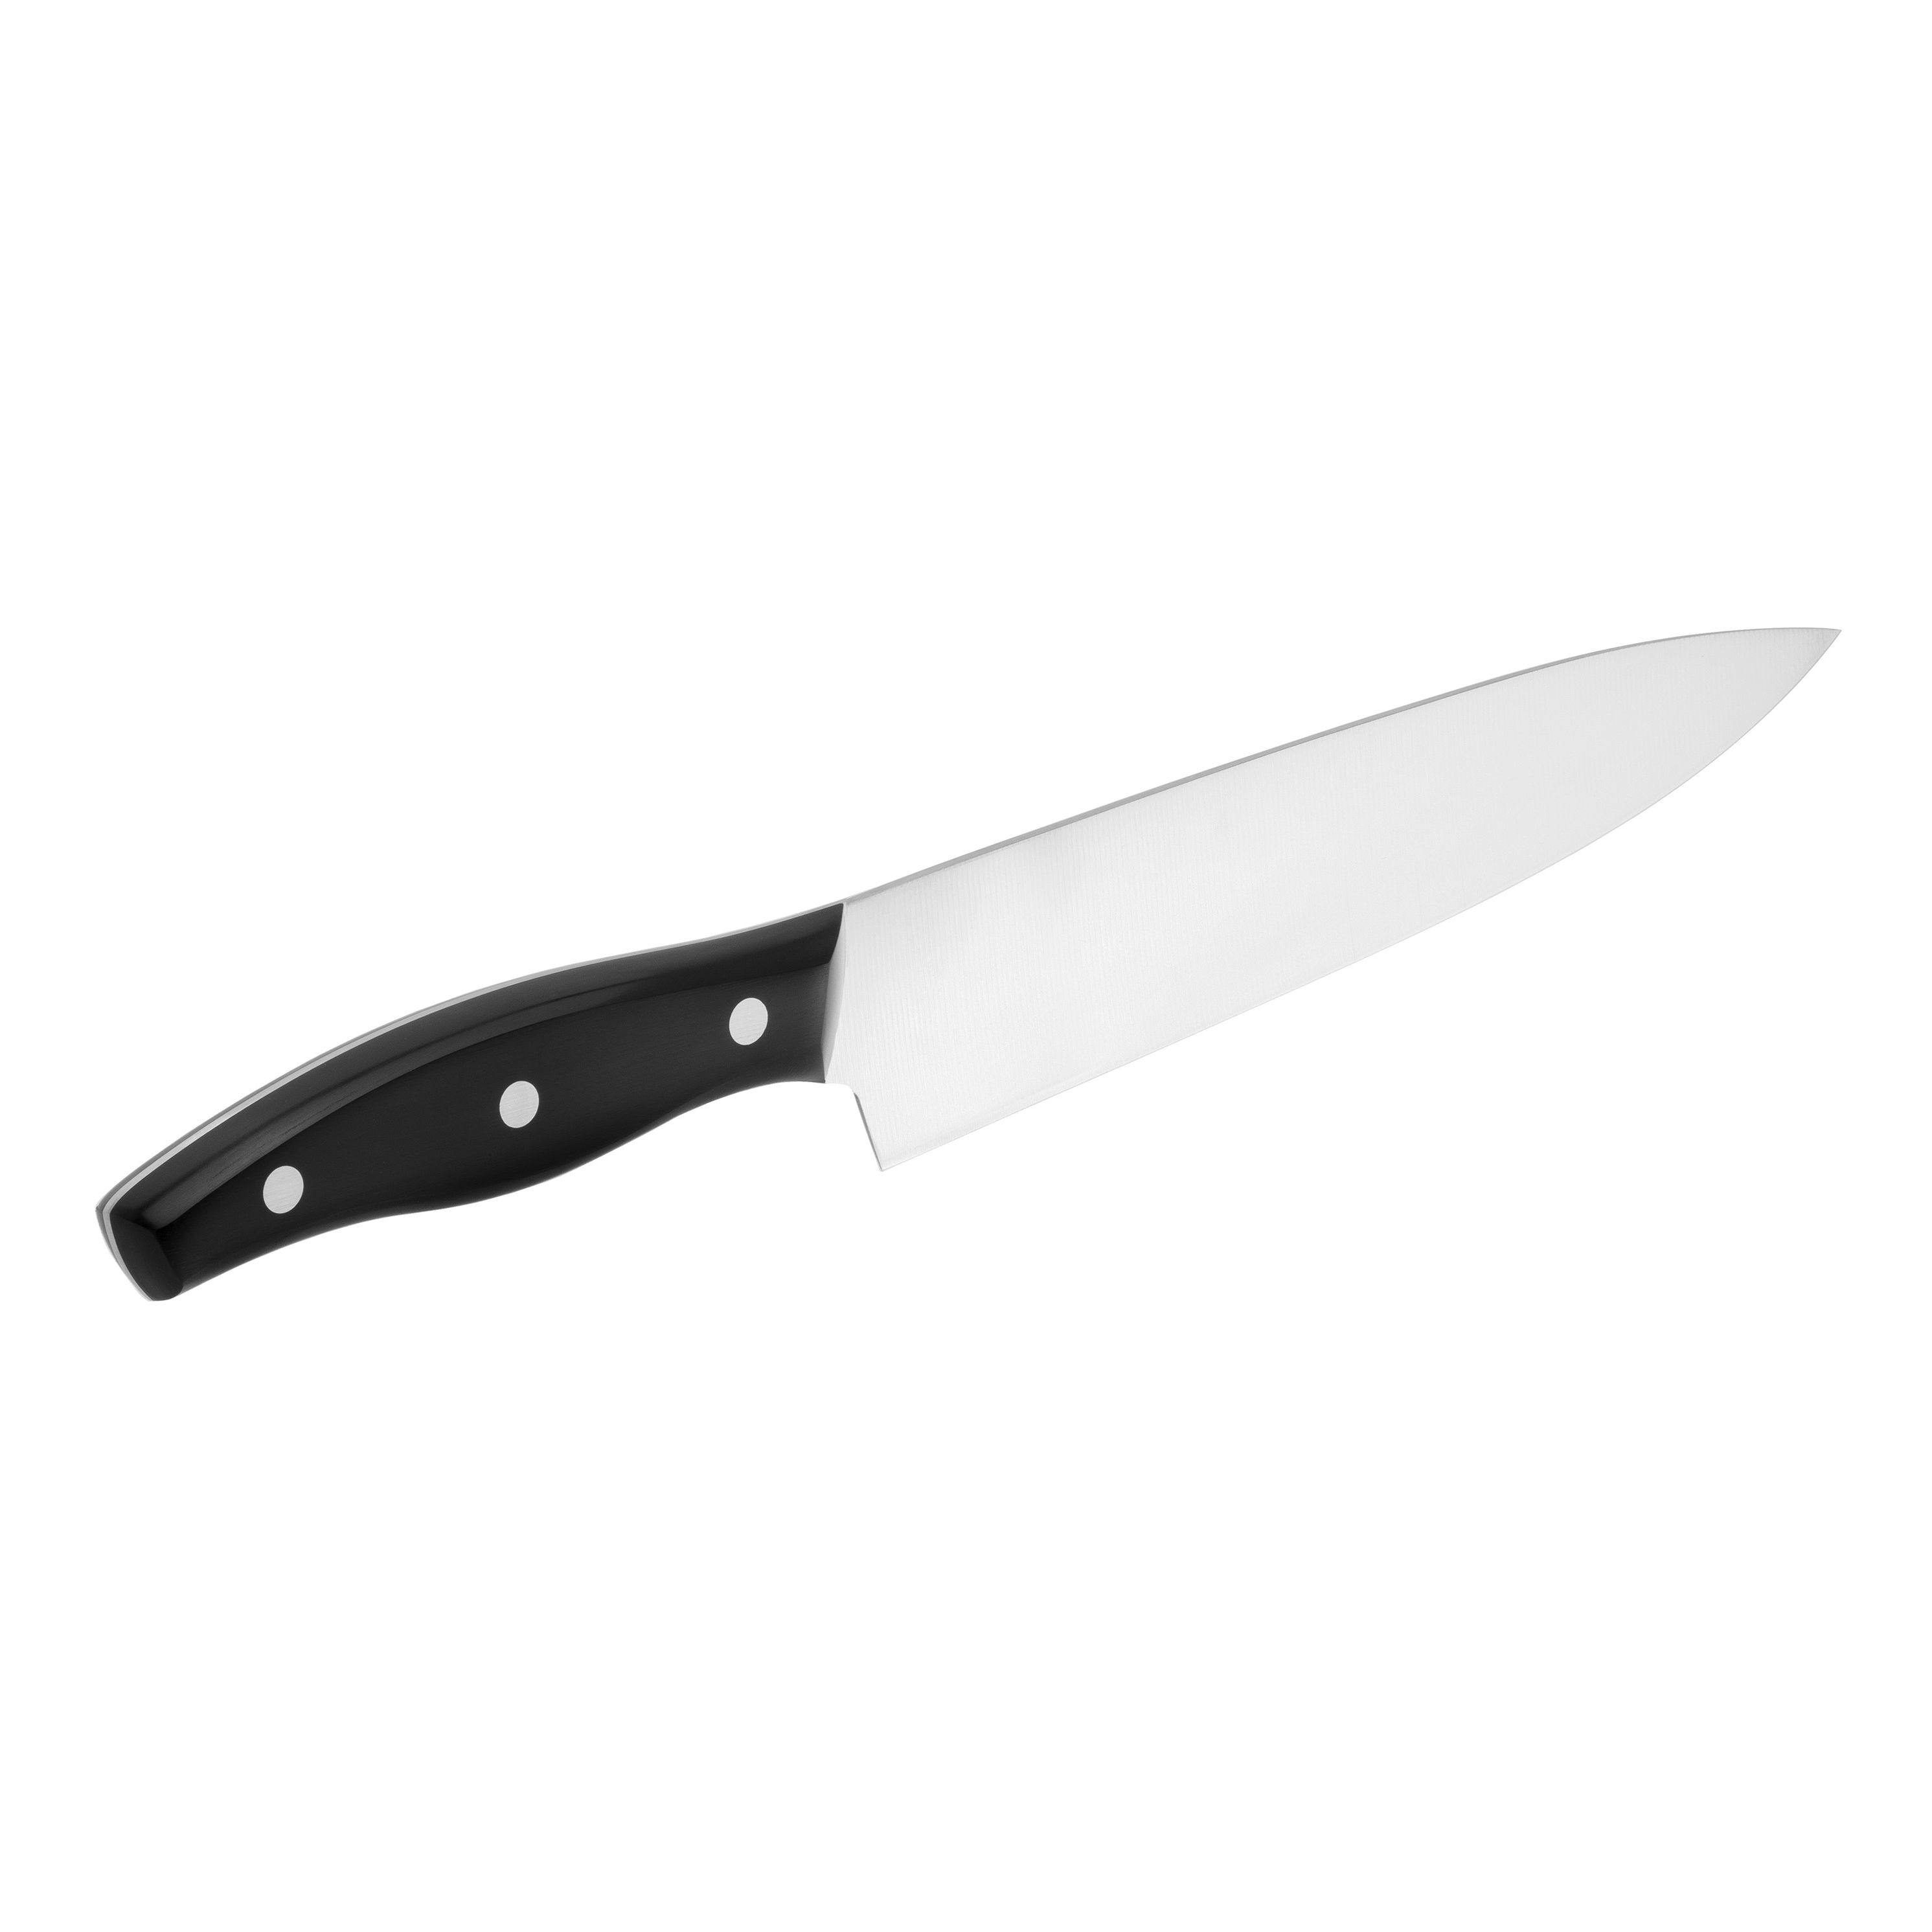 Blackstone Signature Series 7 Stainless Steel Chef's Knife